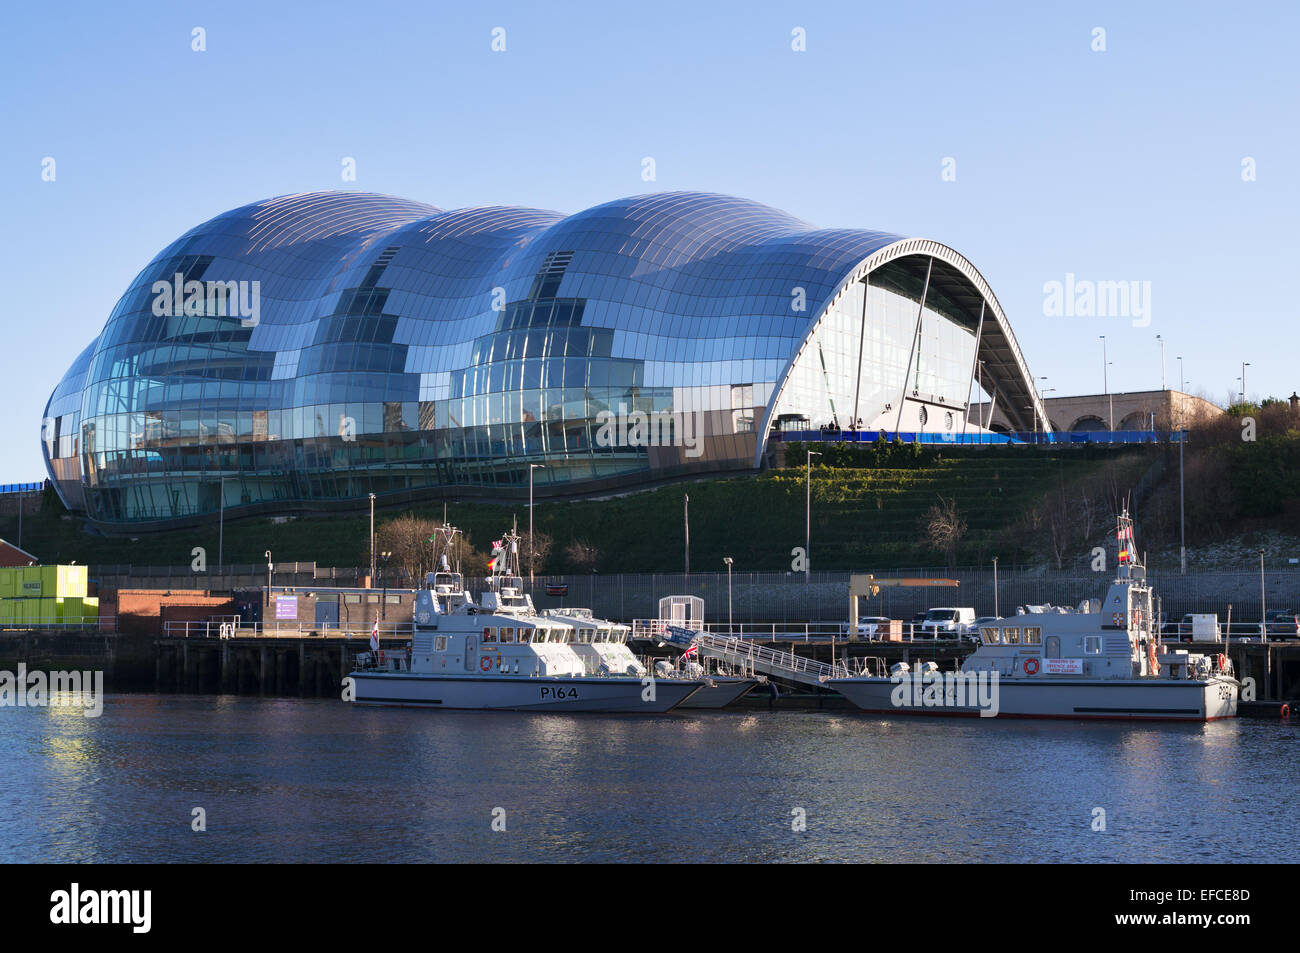 Patrol boats moored in front of the Sage concert hall in Gateshead, north east England, UK Stock Photo